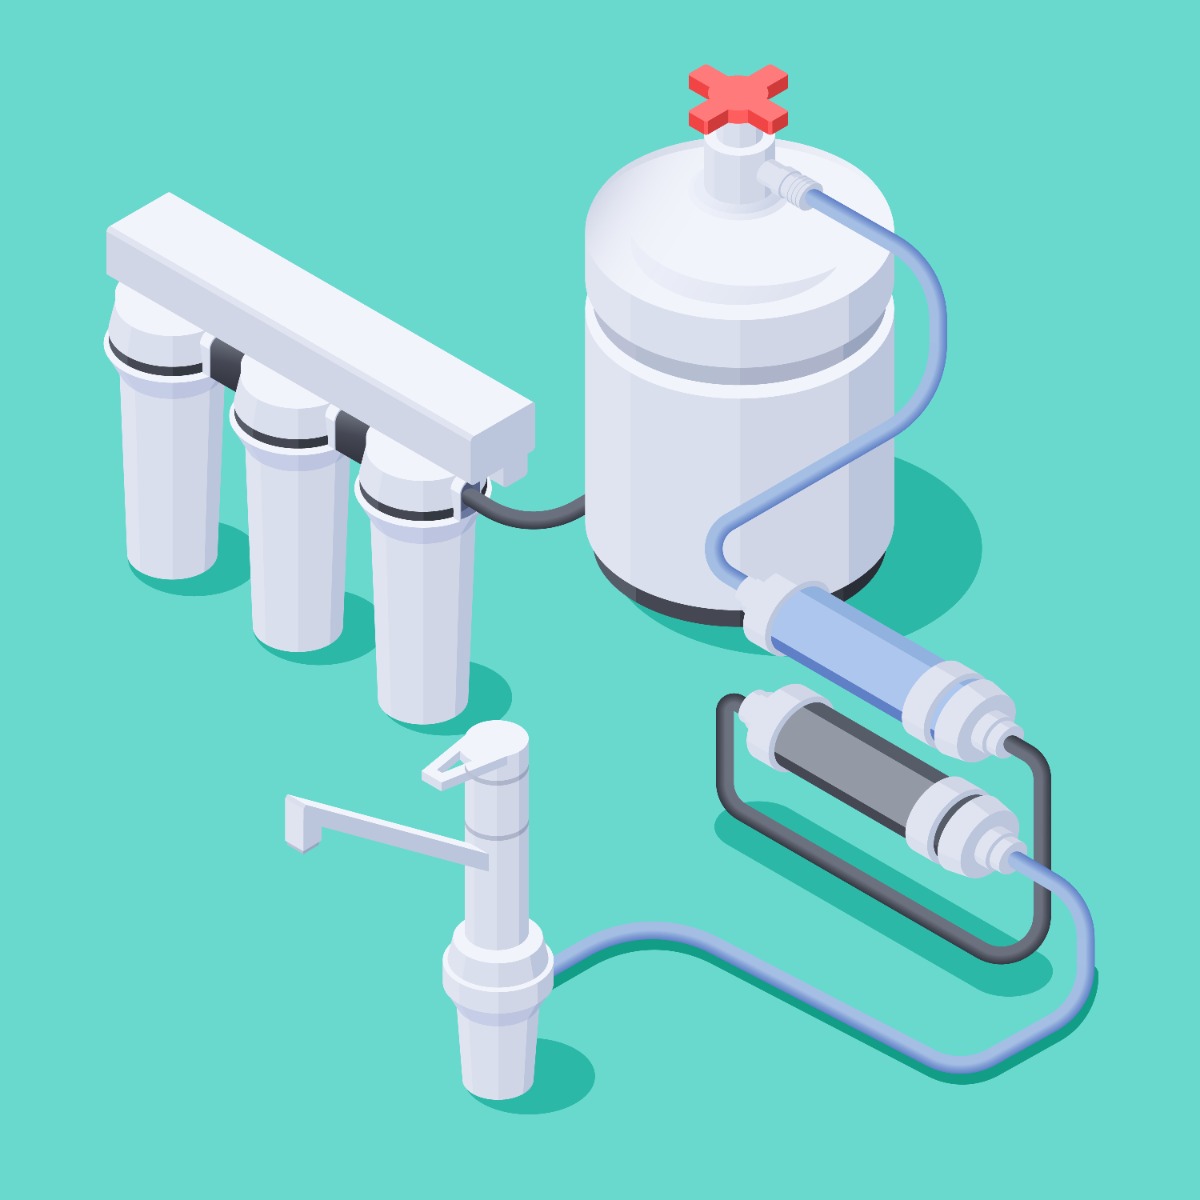 <a href="https://www.freepik.com/free-vector/isometric-composition-water-filtration-system-faucet-colored-3d-illustration_16397264.htm#query=water%20softeners&position=15&from_view=keyword&track=ais">Image by macrovector</a> on Freepik